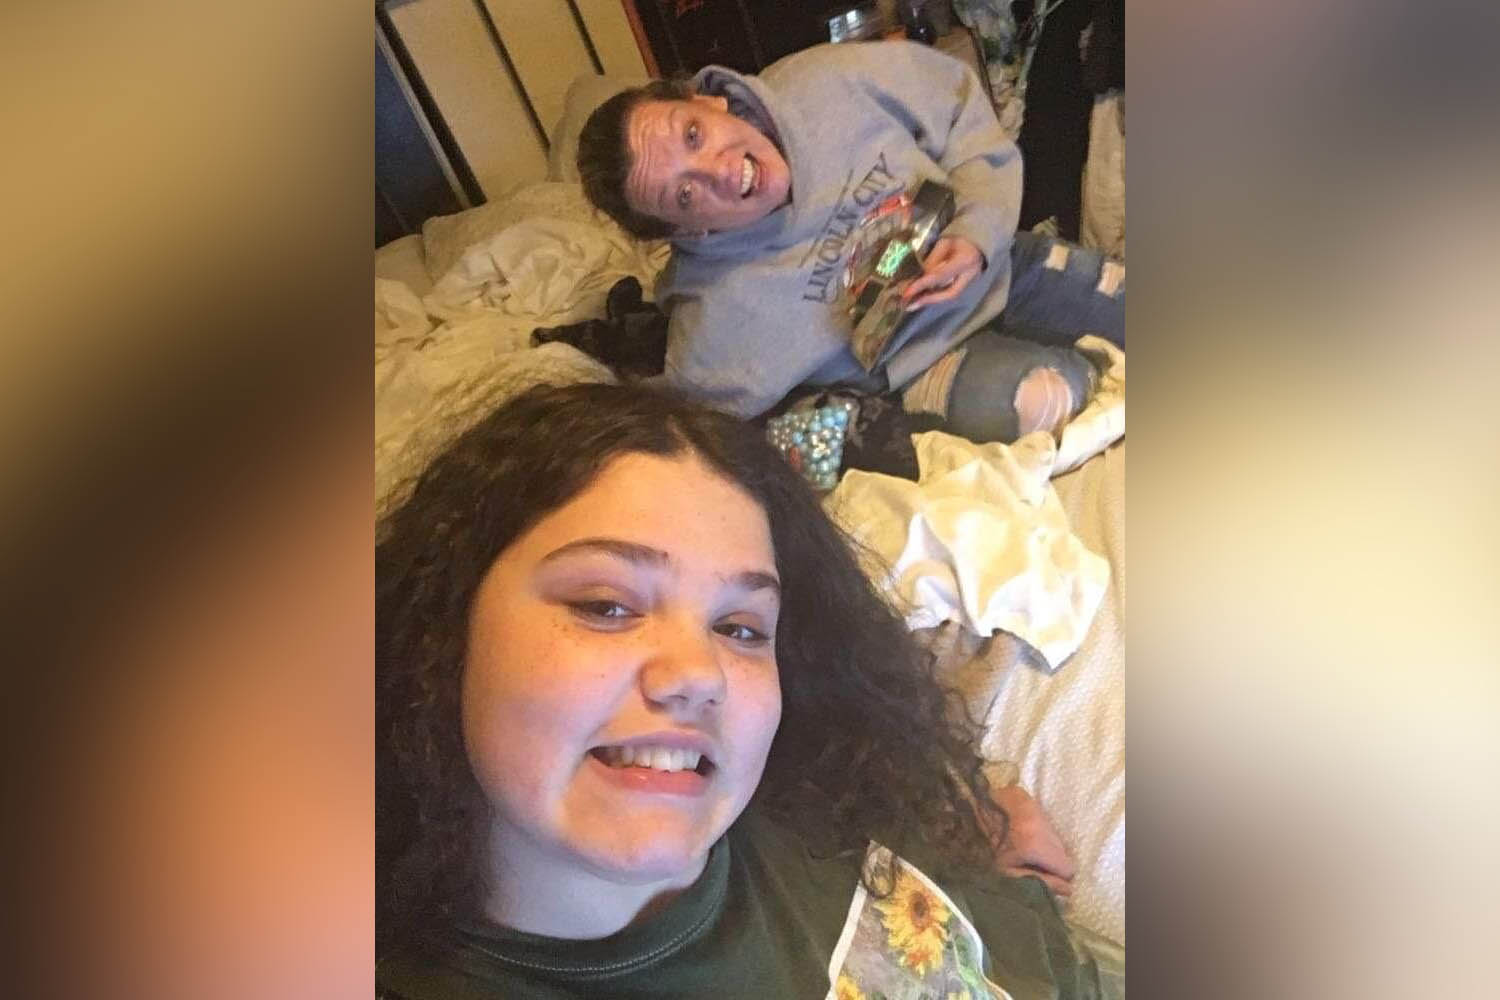 1500px x 1000px - 13-year-old girl severely burned while imitating TikTok video, family says  - ABC News